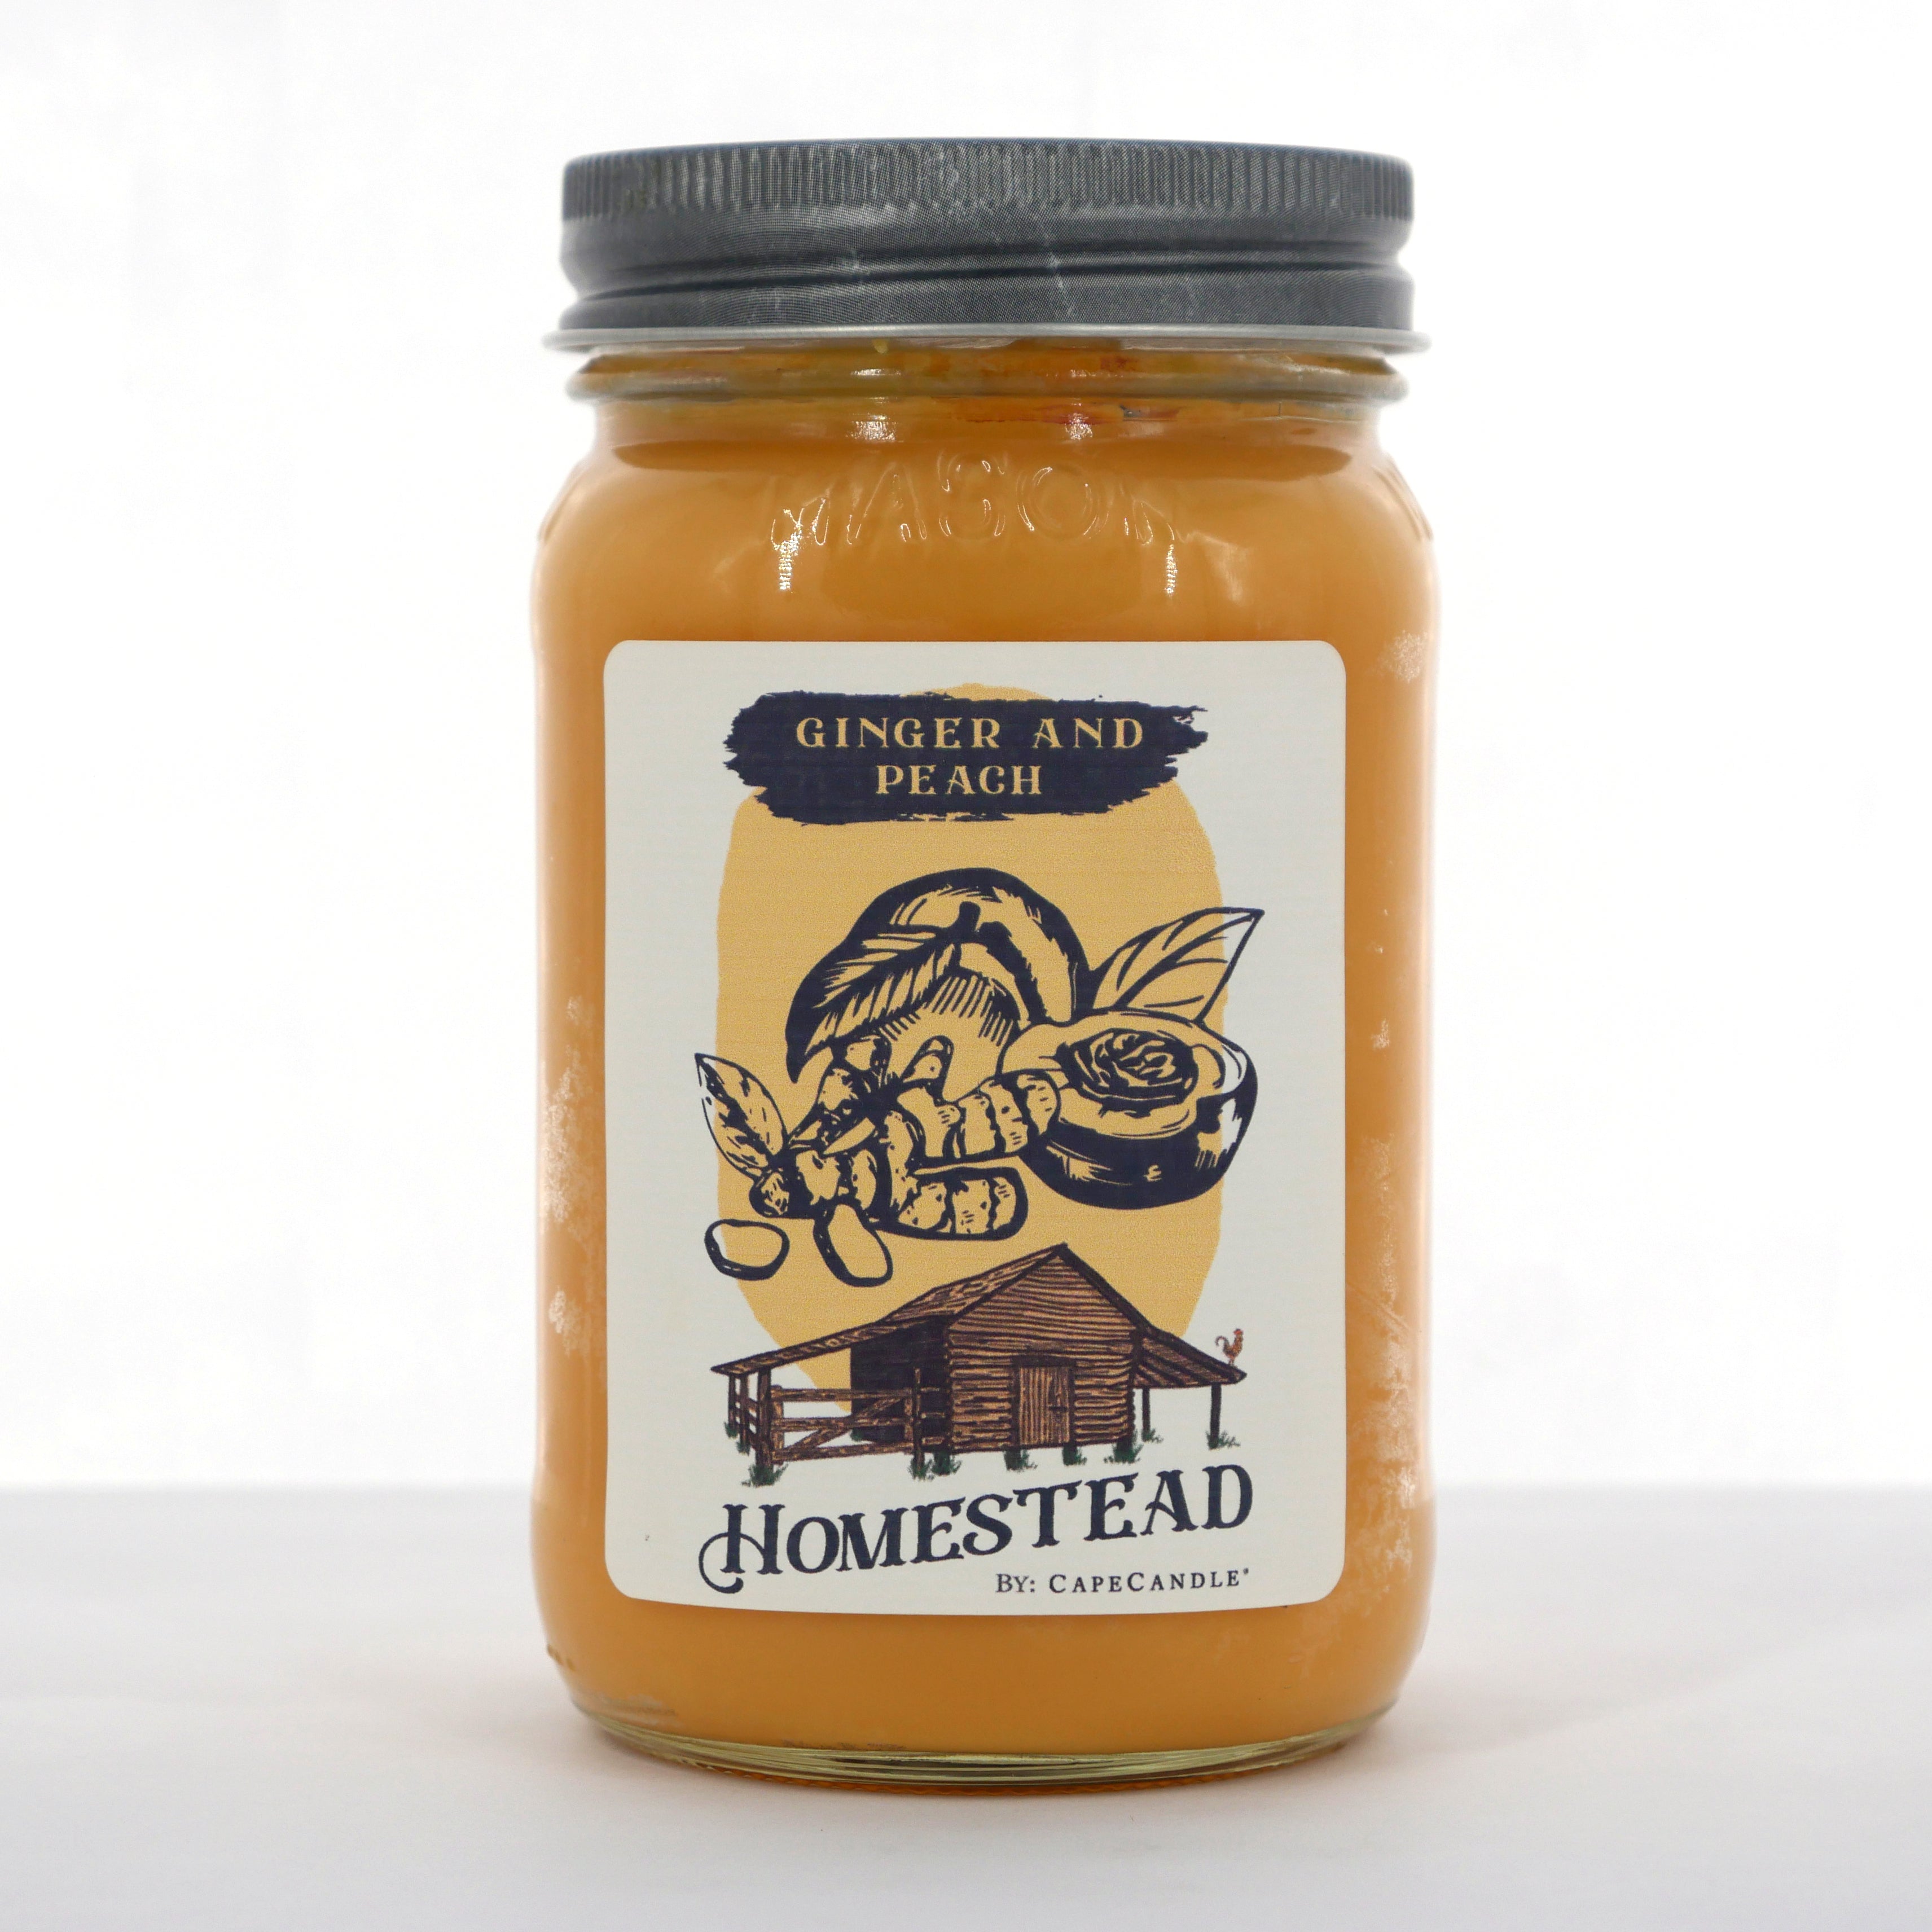 Ginger & Peach Soy Candle 16oz Homestead Mason Jar by Cape Candle